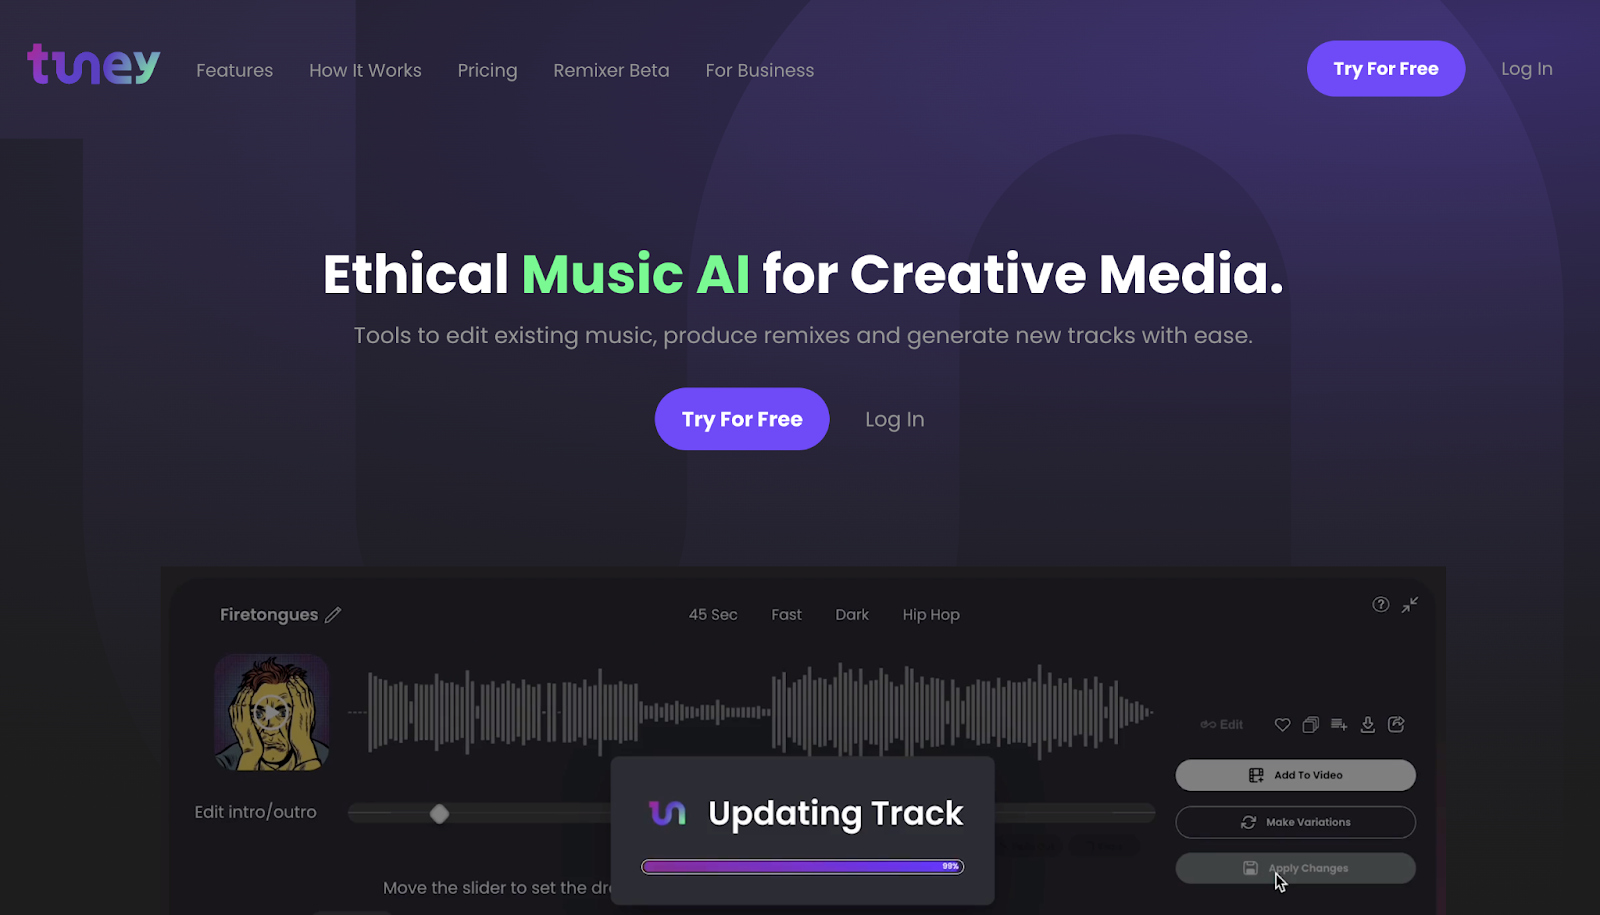 Tuney.io is one of the best AI tools for music production, editing, and generation